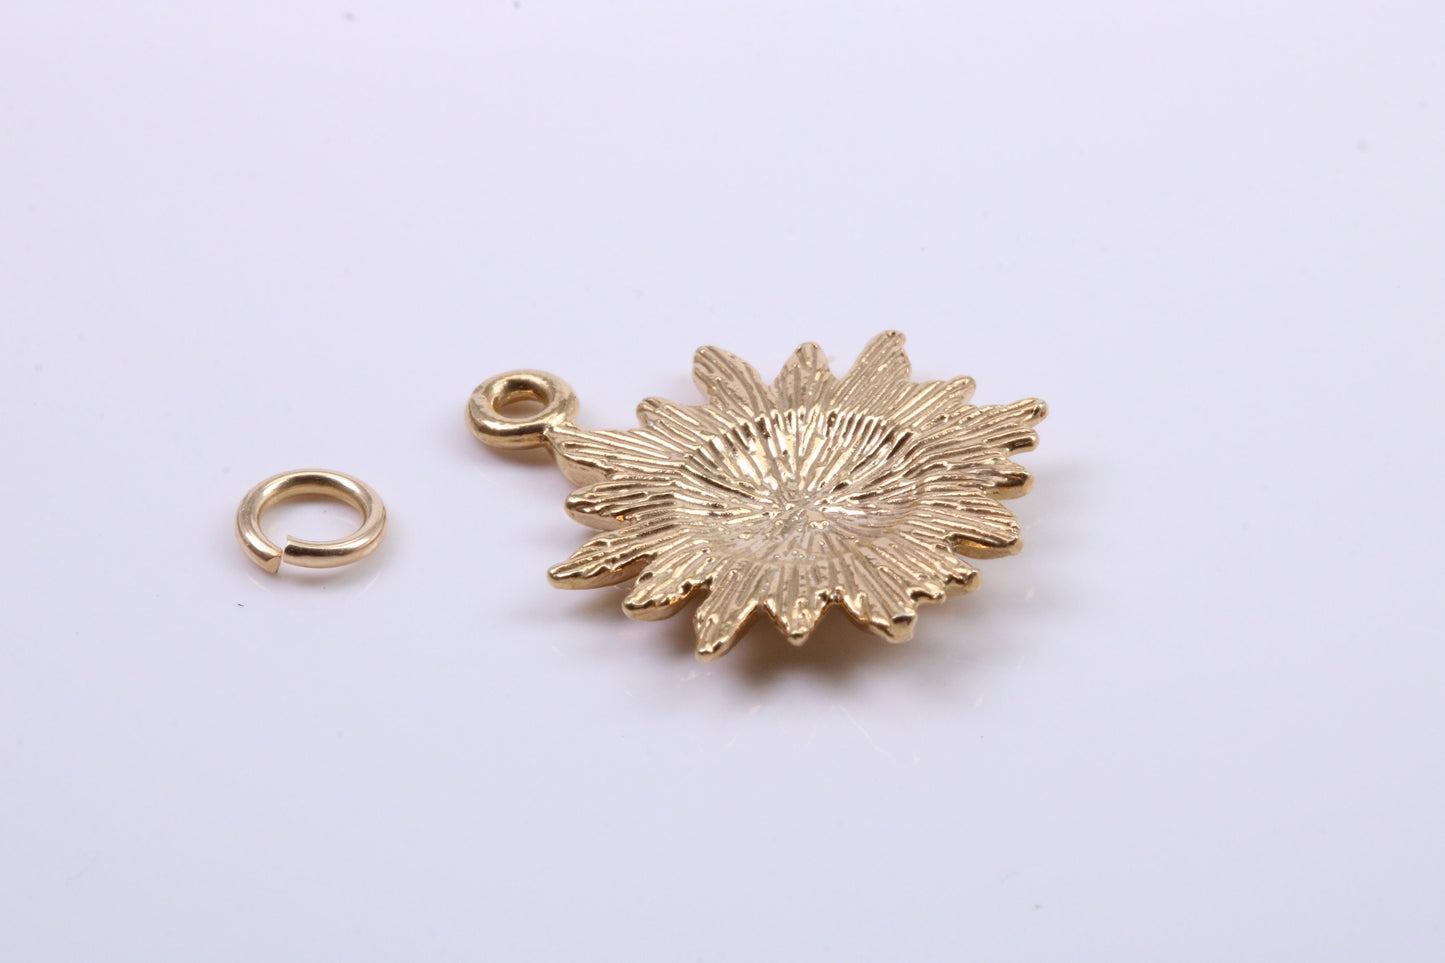 Sun Charm, Traditional Charm, Made from Solid 9ct Yellow Gold, British Hallmarked, Complete with Attachment Link